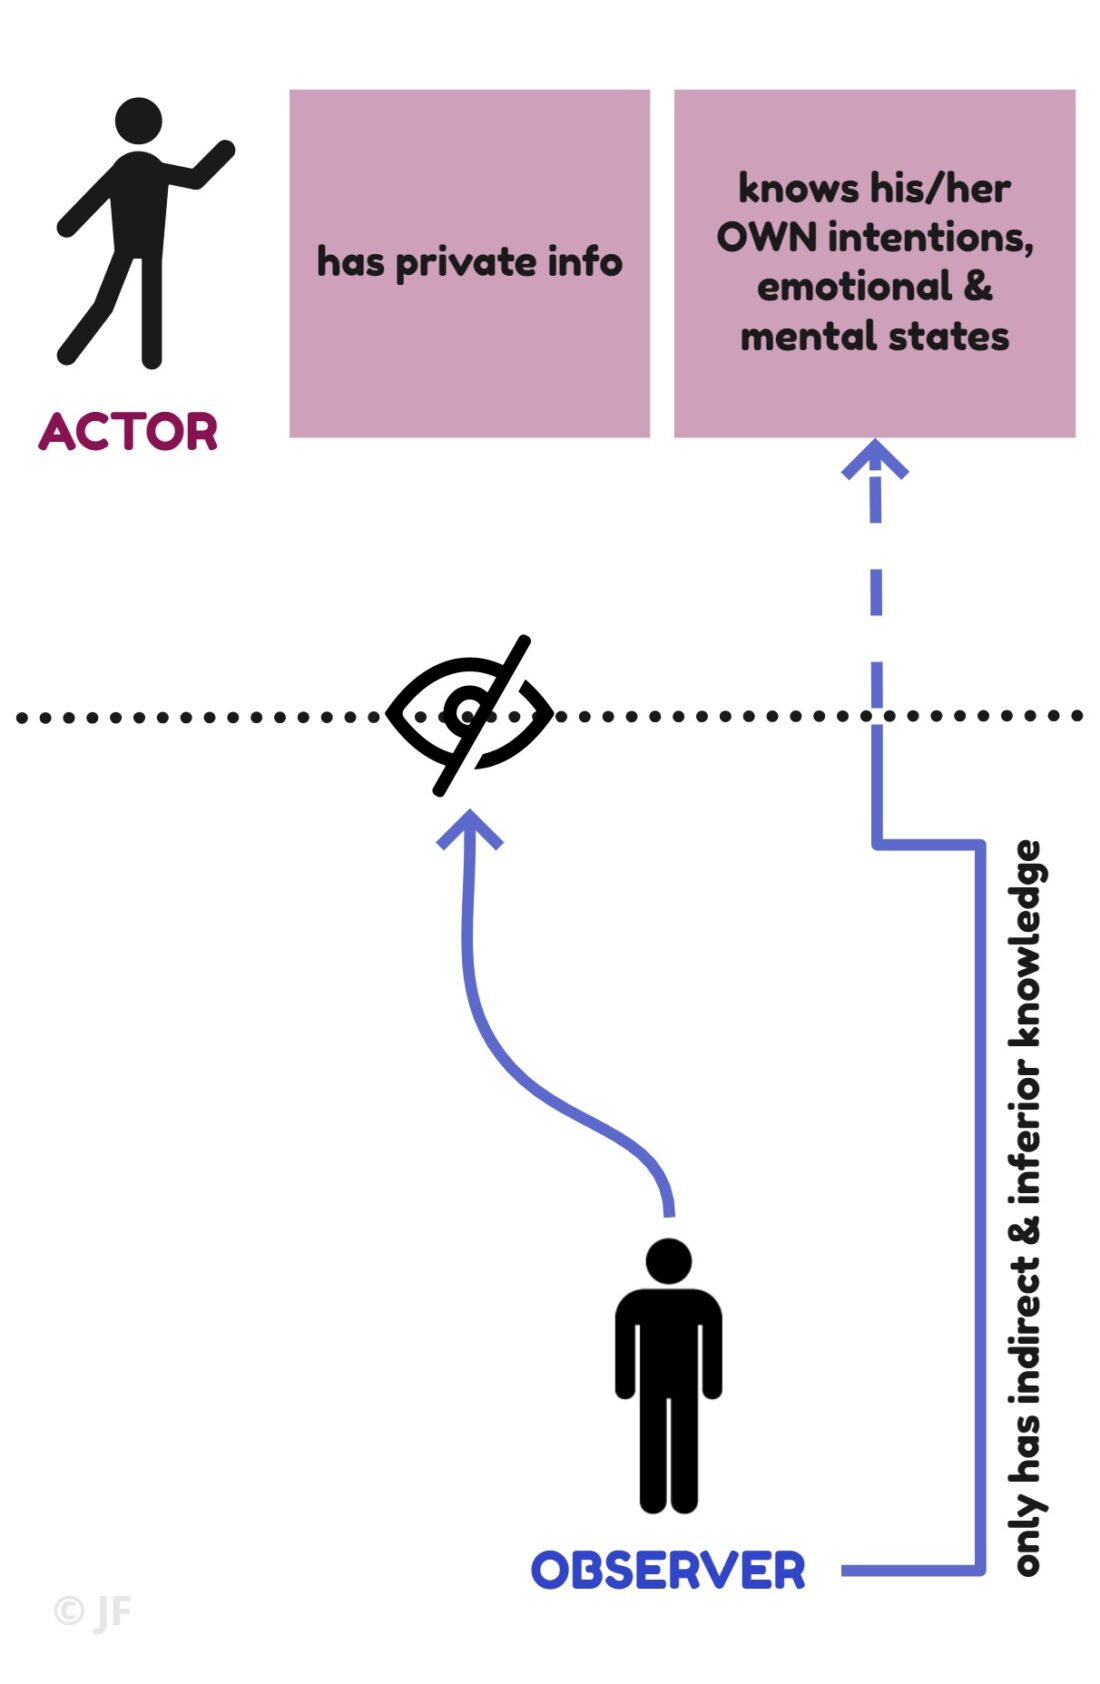 is an example of actor observer bias